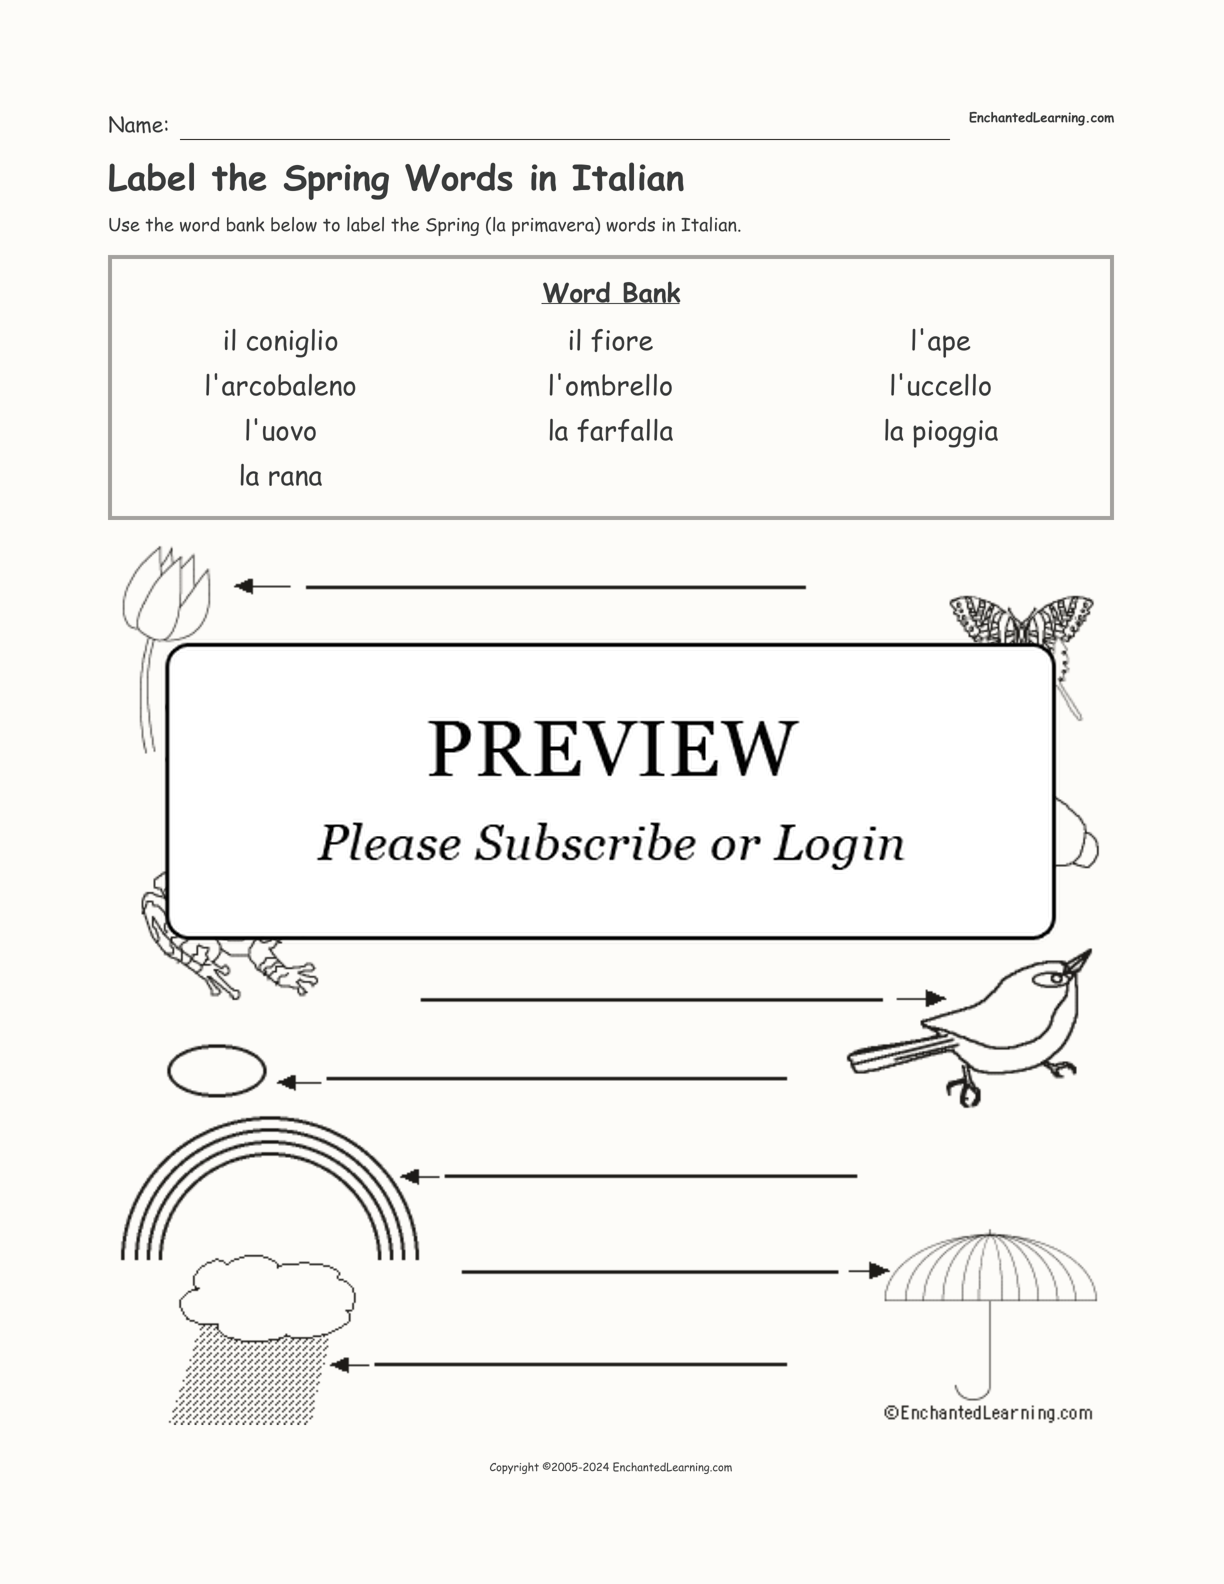 Label the Spring Words in Italian interactive worksheet page 1